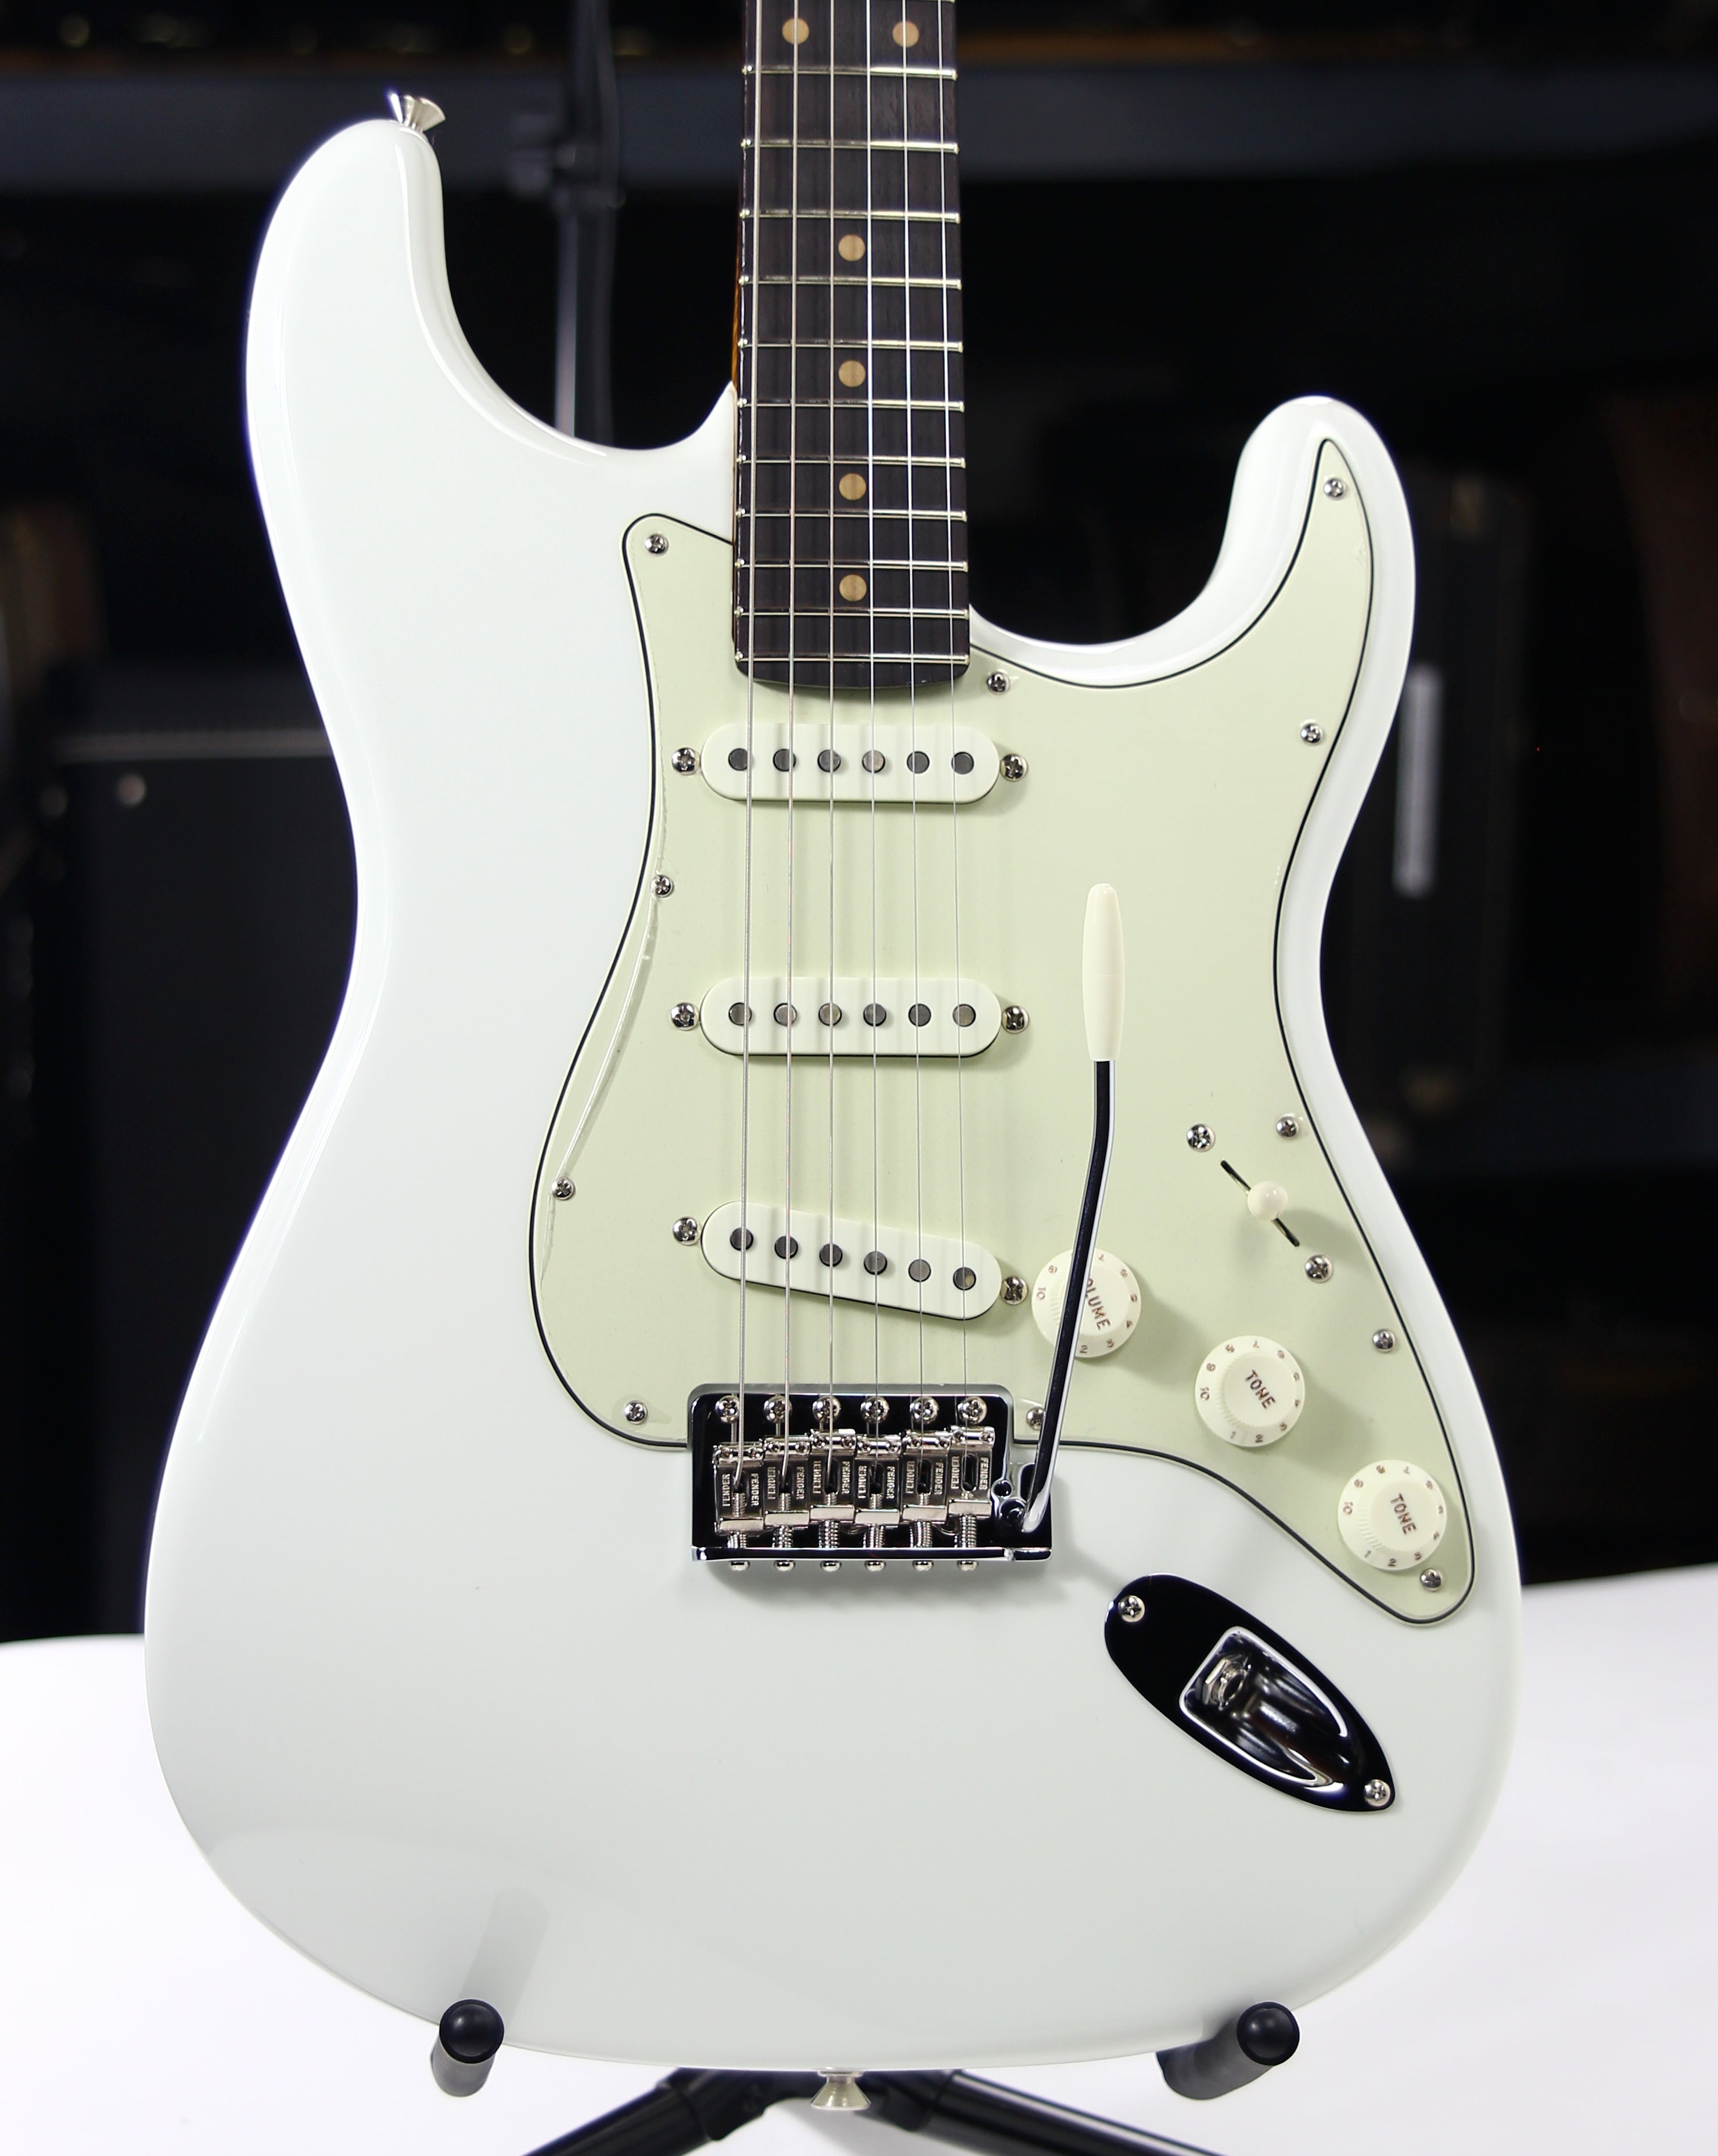 *SOLD*  2022 Fender Custom Shop GT11 '60 Stratocaster Roasted FLAME NECK - NOS Olympic White Sweetwater Dealer Select